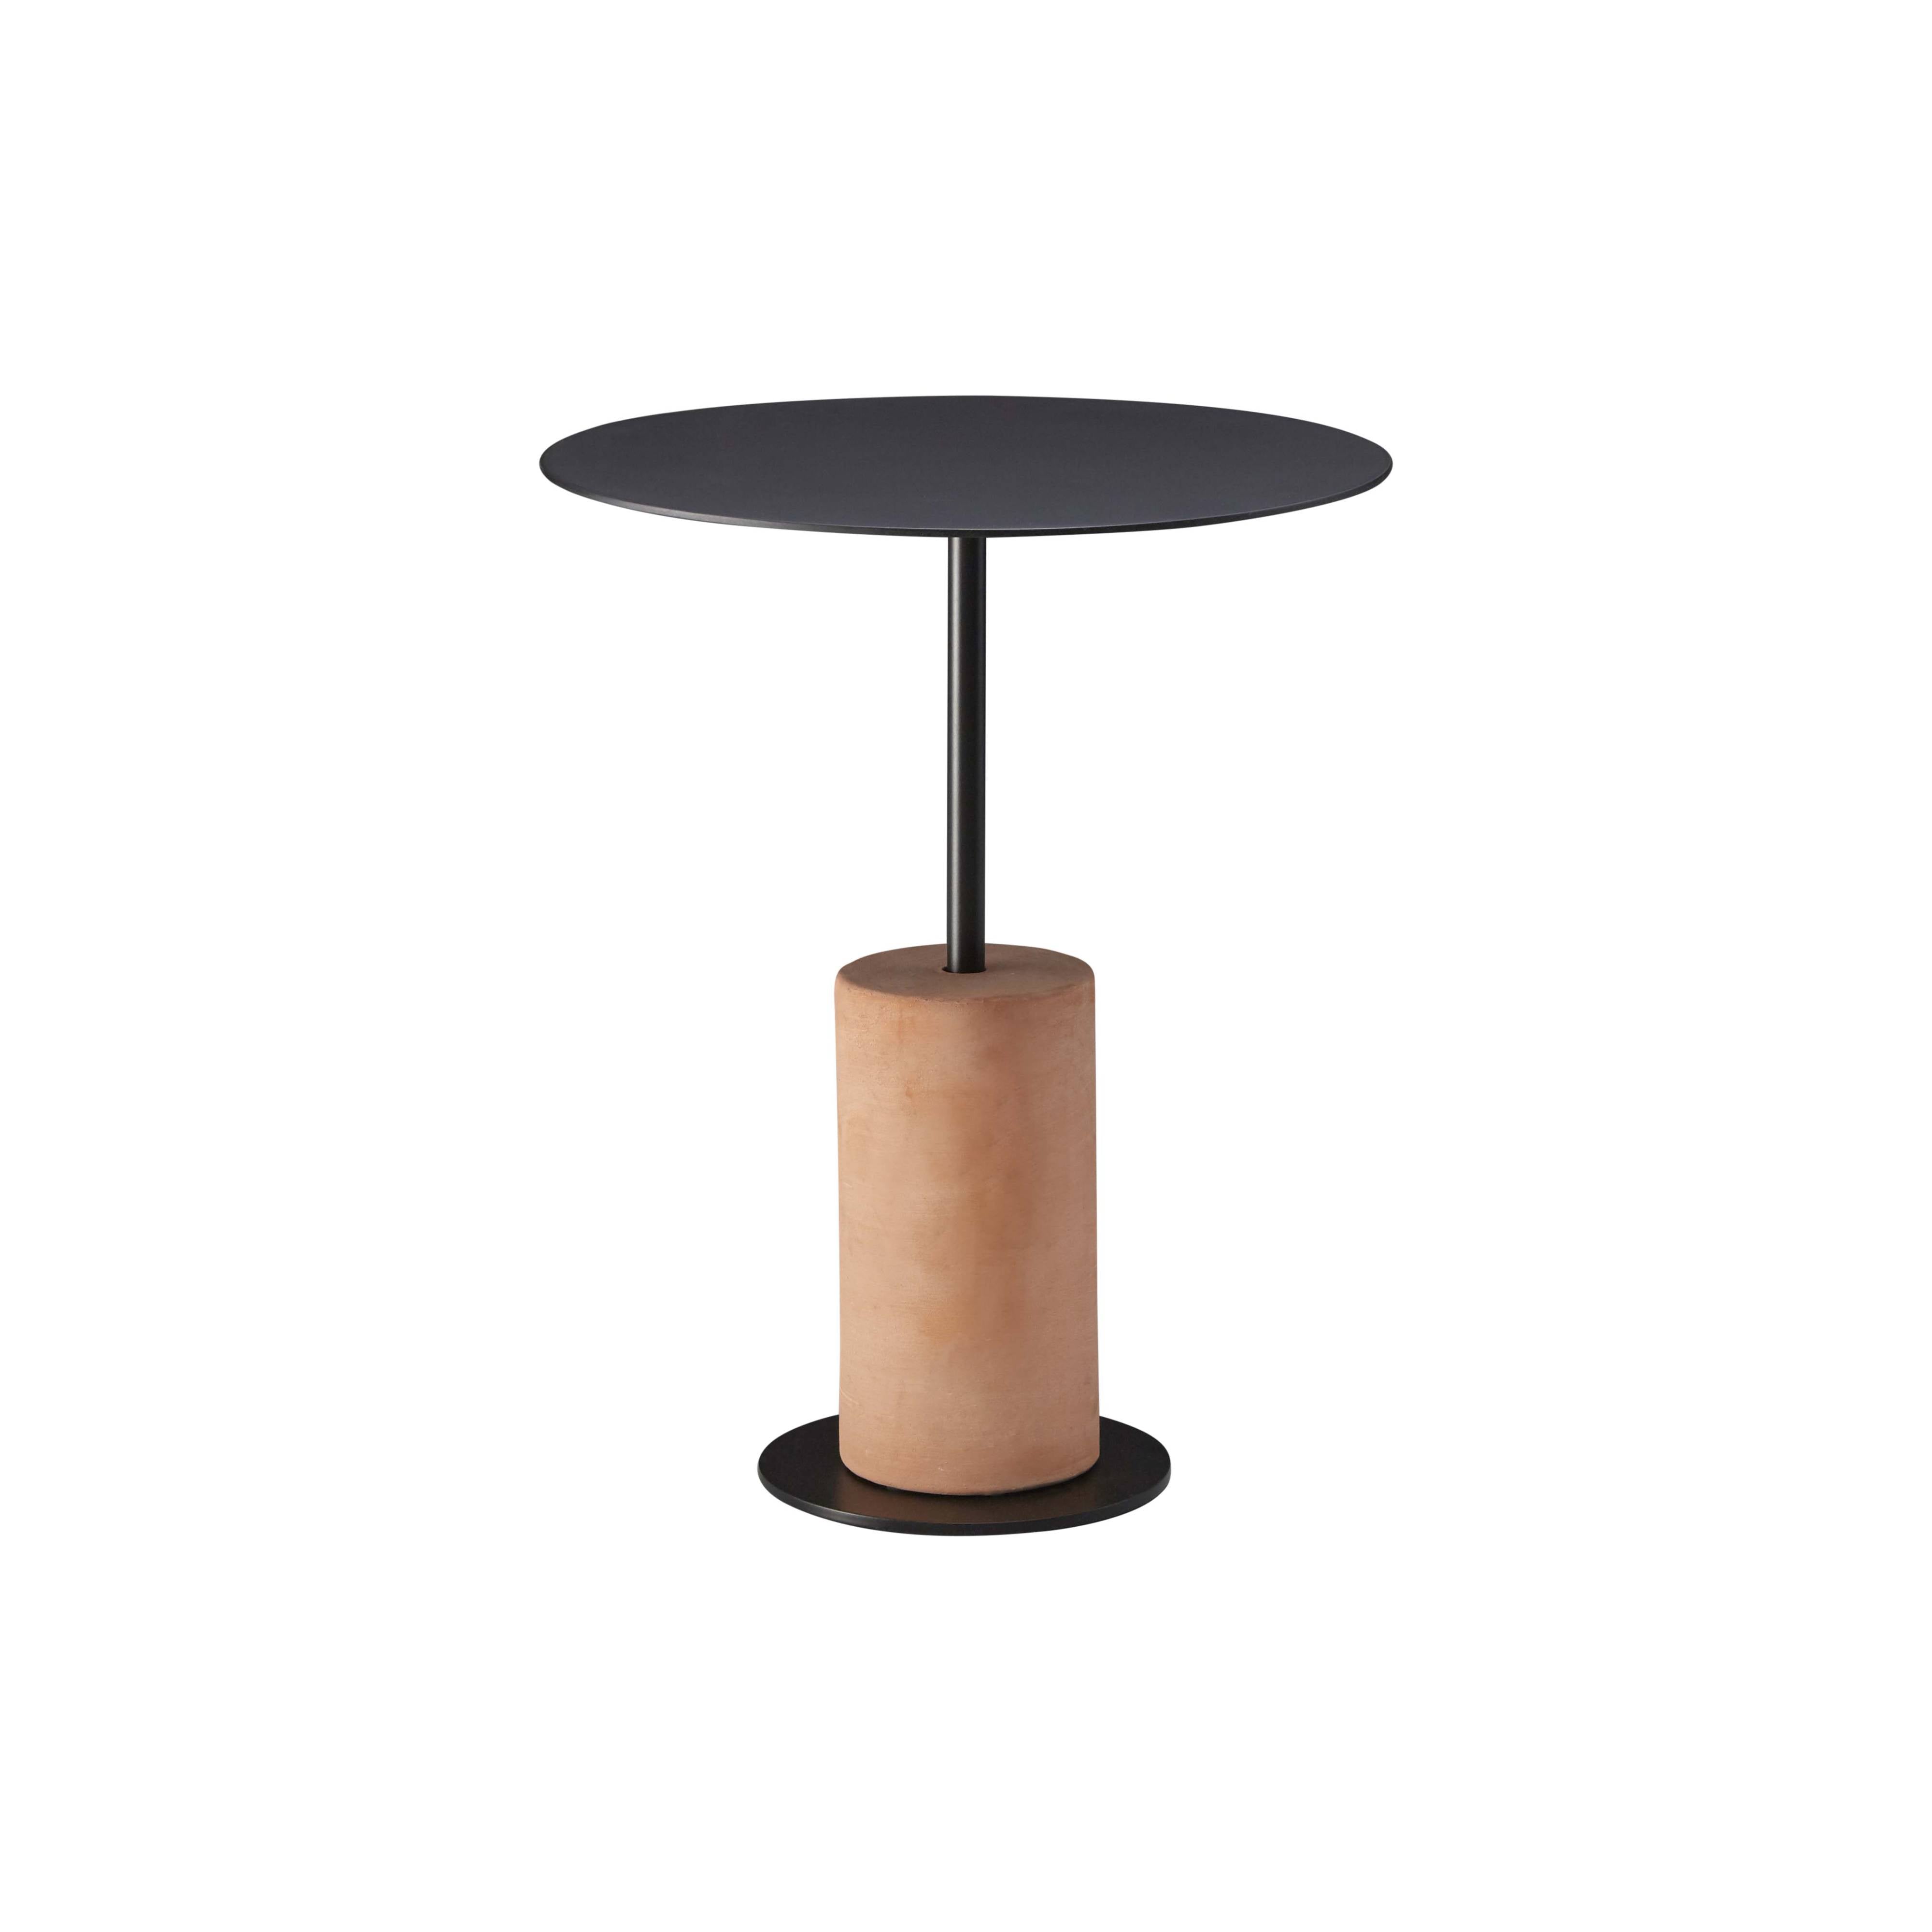 Louie Side Table: Small - 15.7